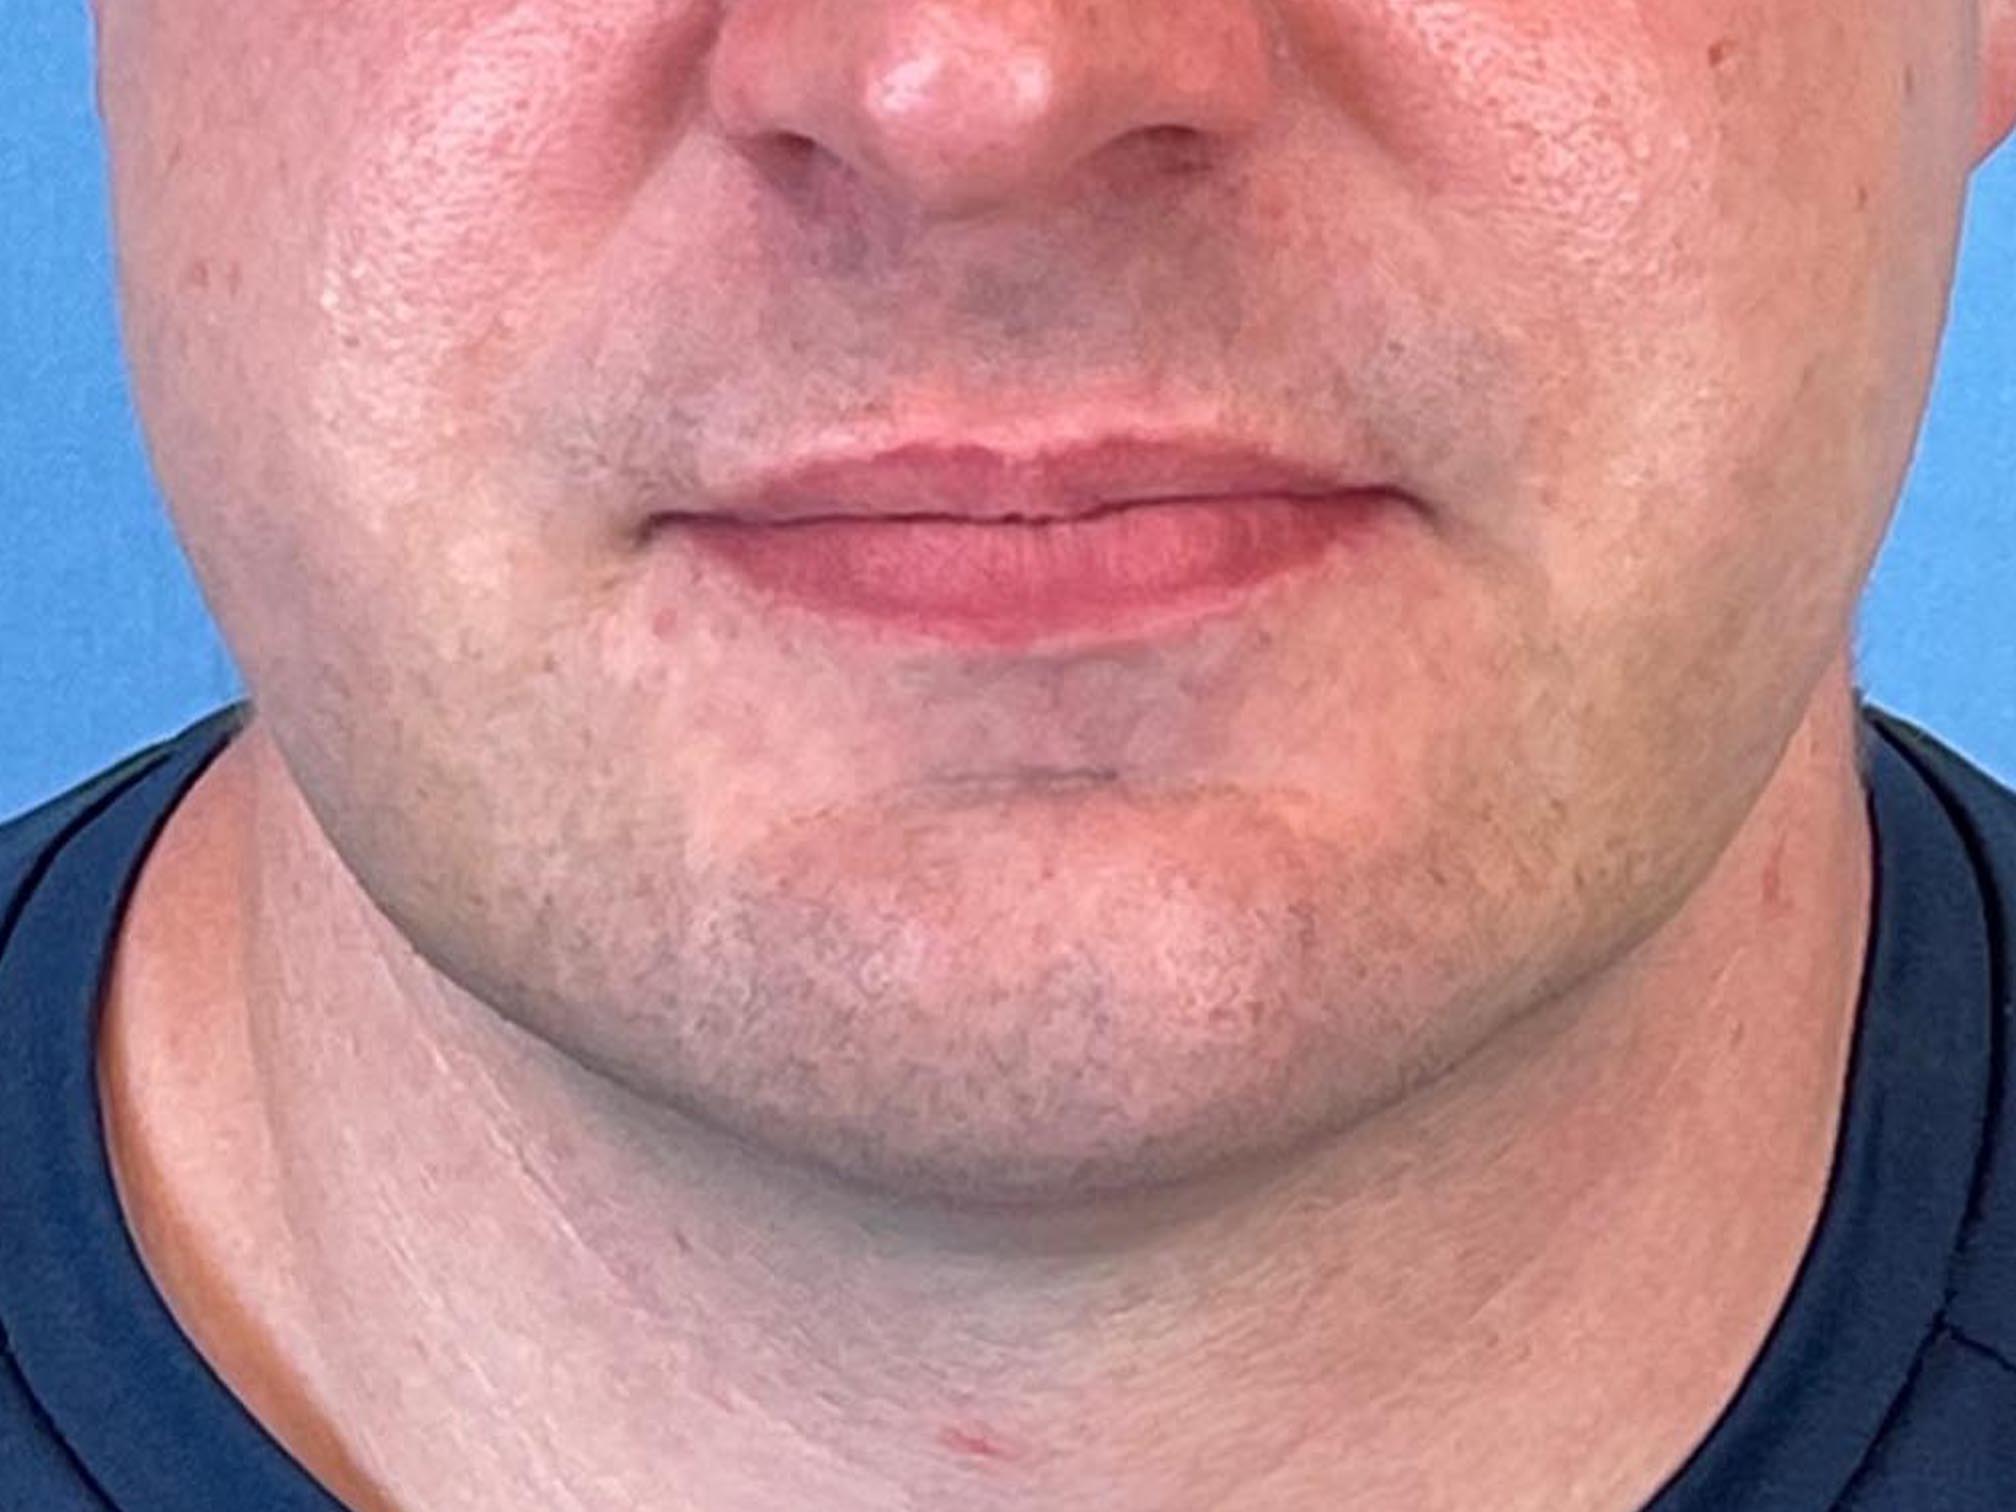 Photo of the patient’s face after the Necklift surgery. Patient 8 - Set 6